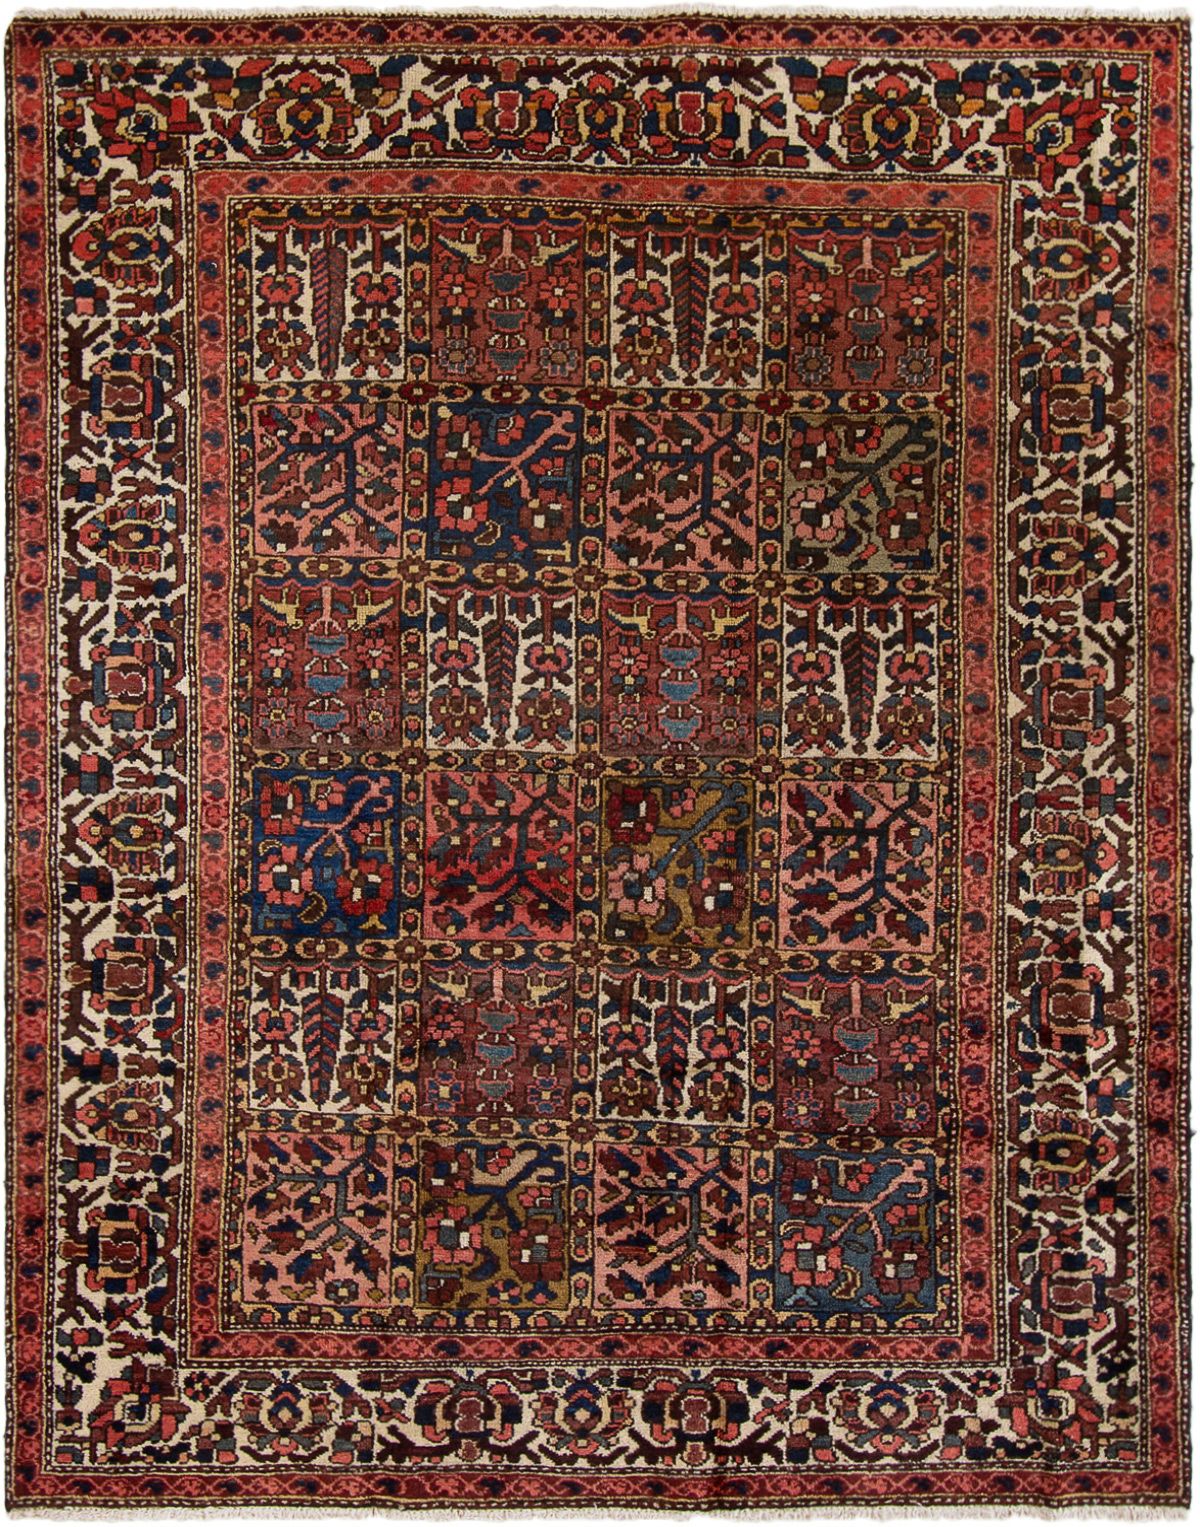 Hand-knotted Bakhtiar  Wool Rug 6'9" x 5'3" Size: 5'3" x 6'9"  